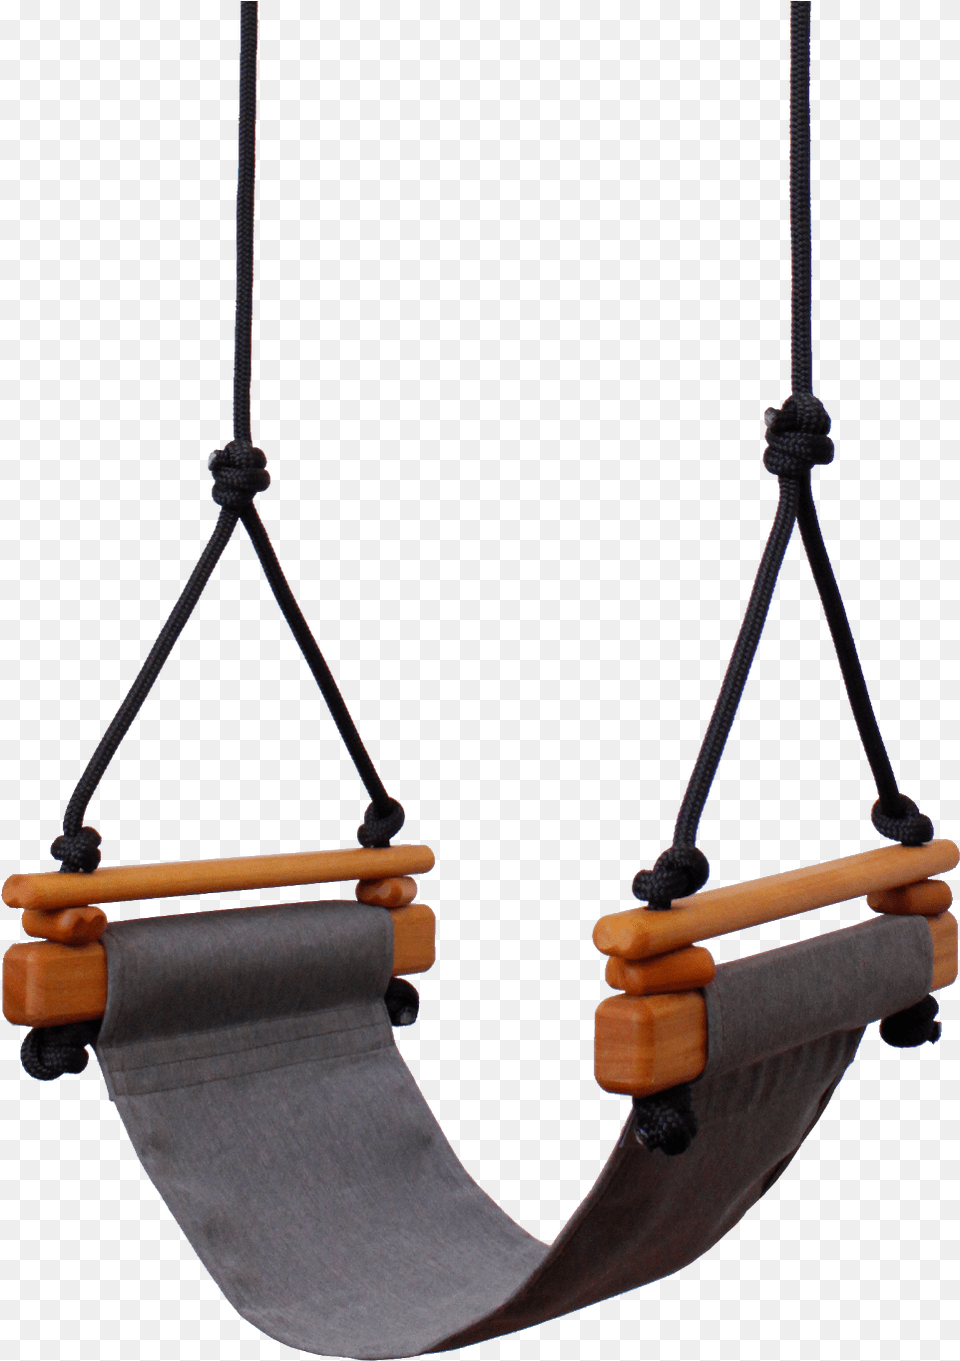 Solvej Child Swing Smokey Grey Swing, Toy, Furniture, Accessories, Jewelry Png